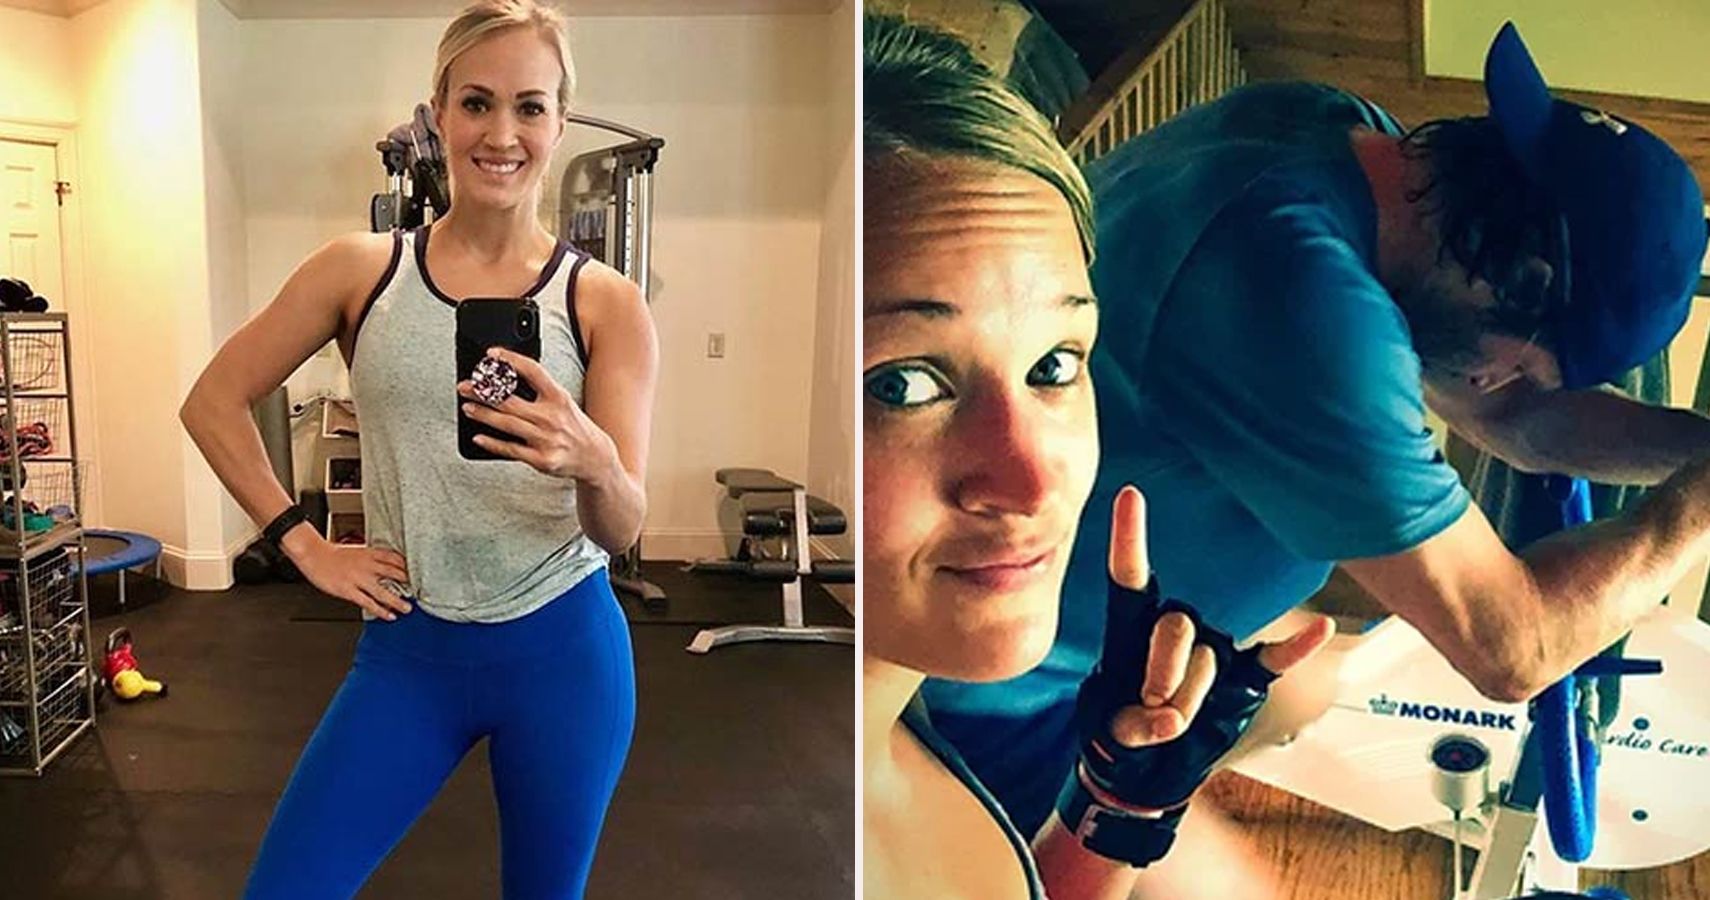 https://static0.thethingsimages.com/wordpress/wp-content/uploads/2019/12/carrie-underwood-workout.jpg